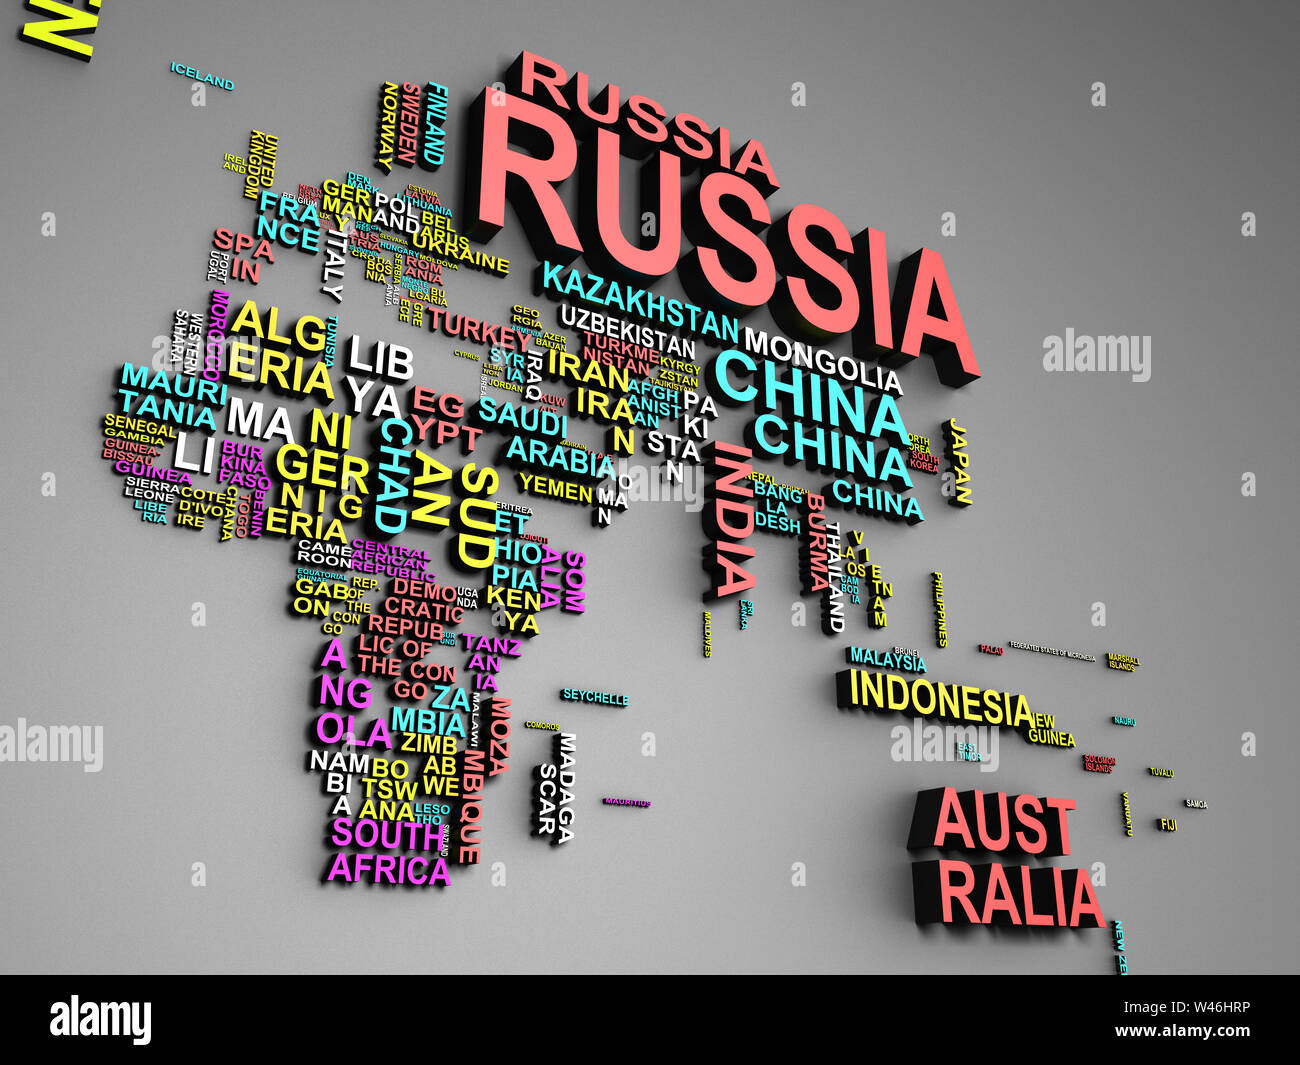 The world map with all states and their names 3d illustration on ...